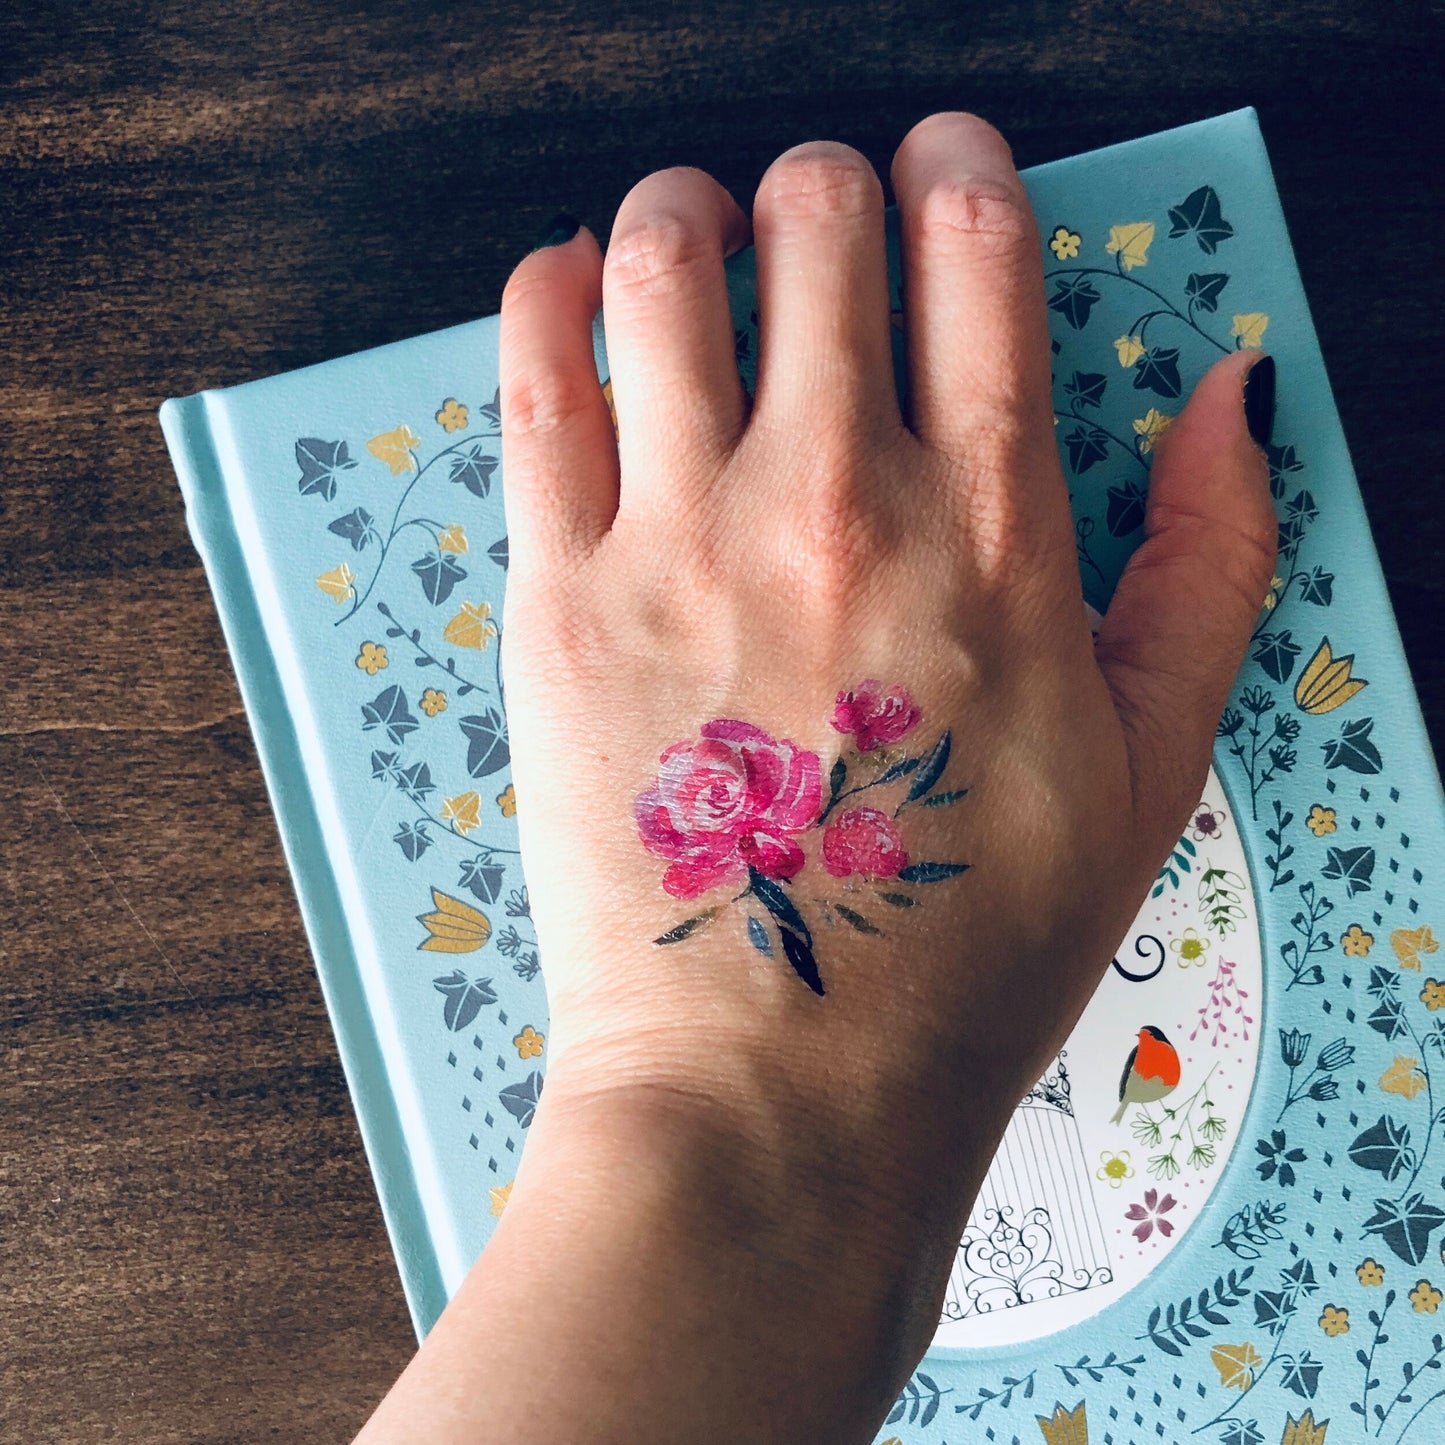 Tattly Tattoos Set of 3 - Strong Florals